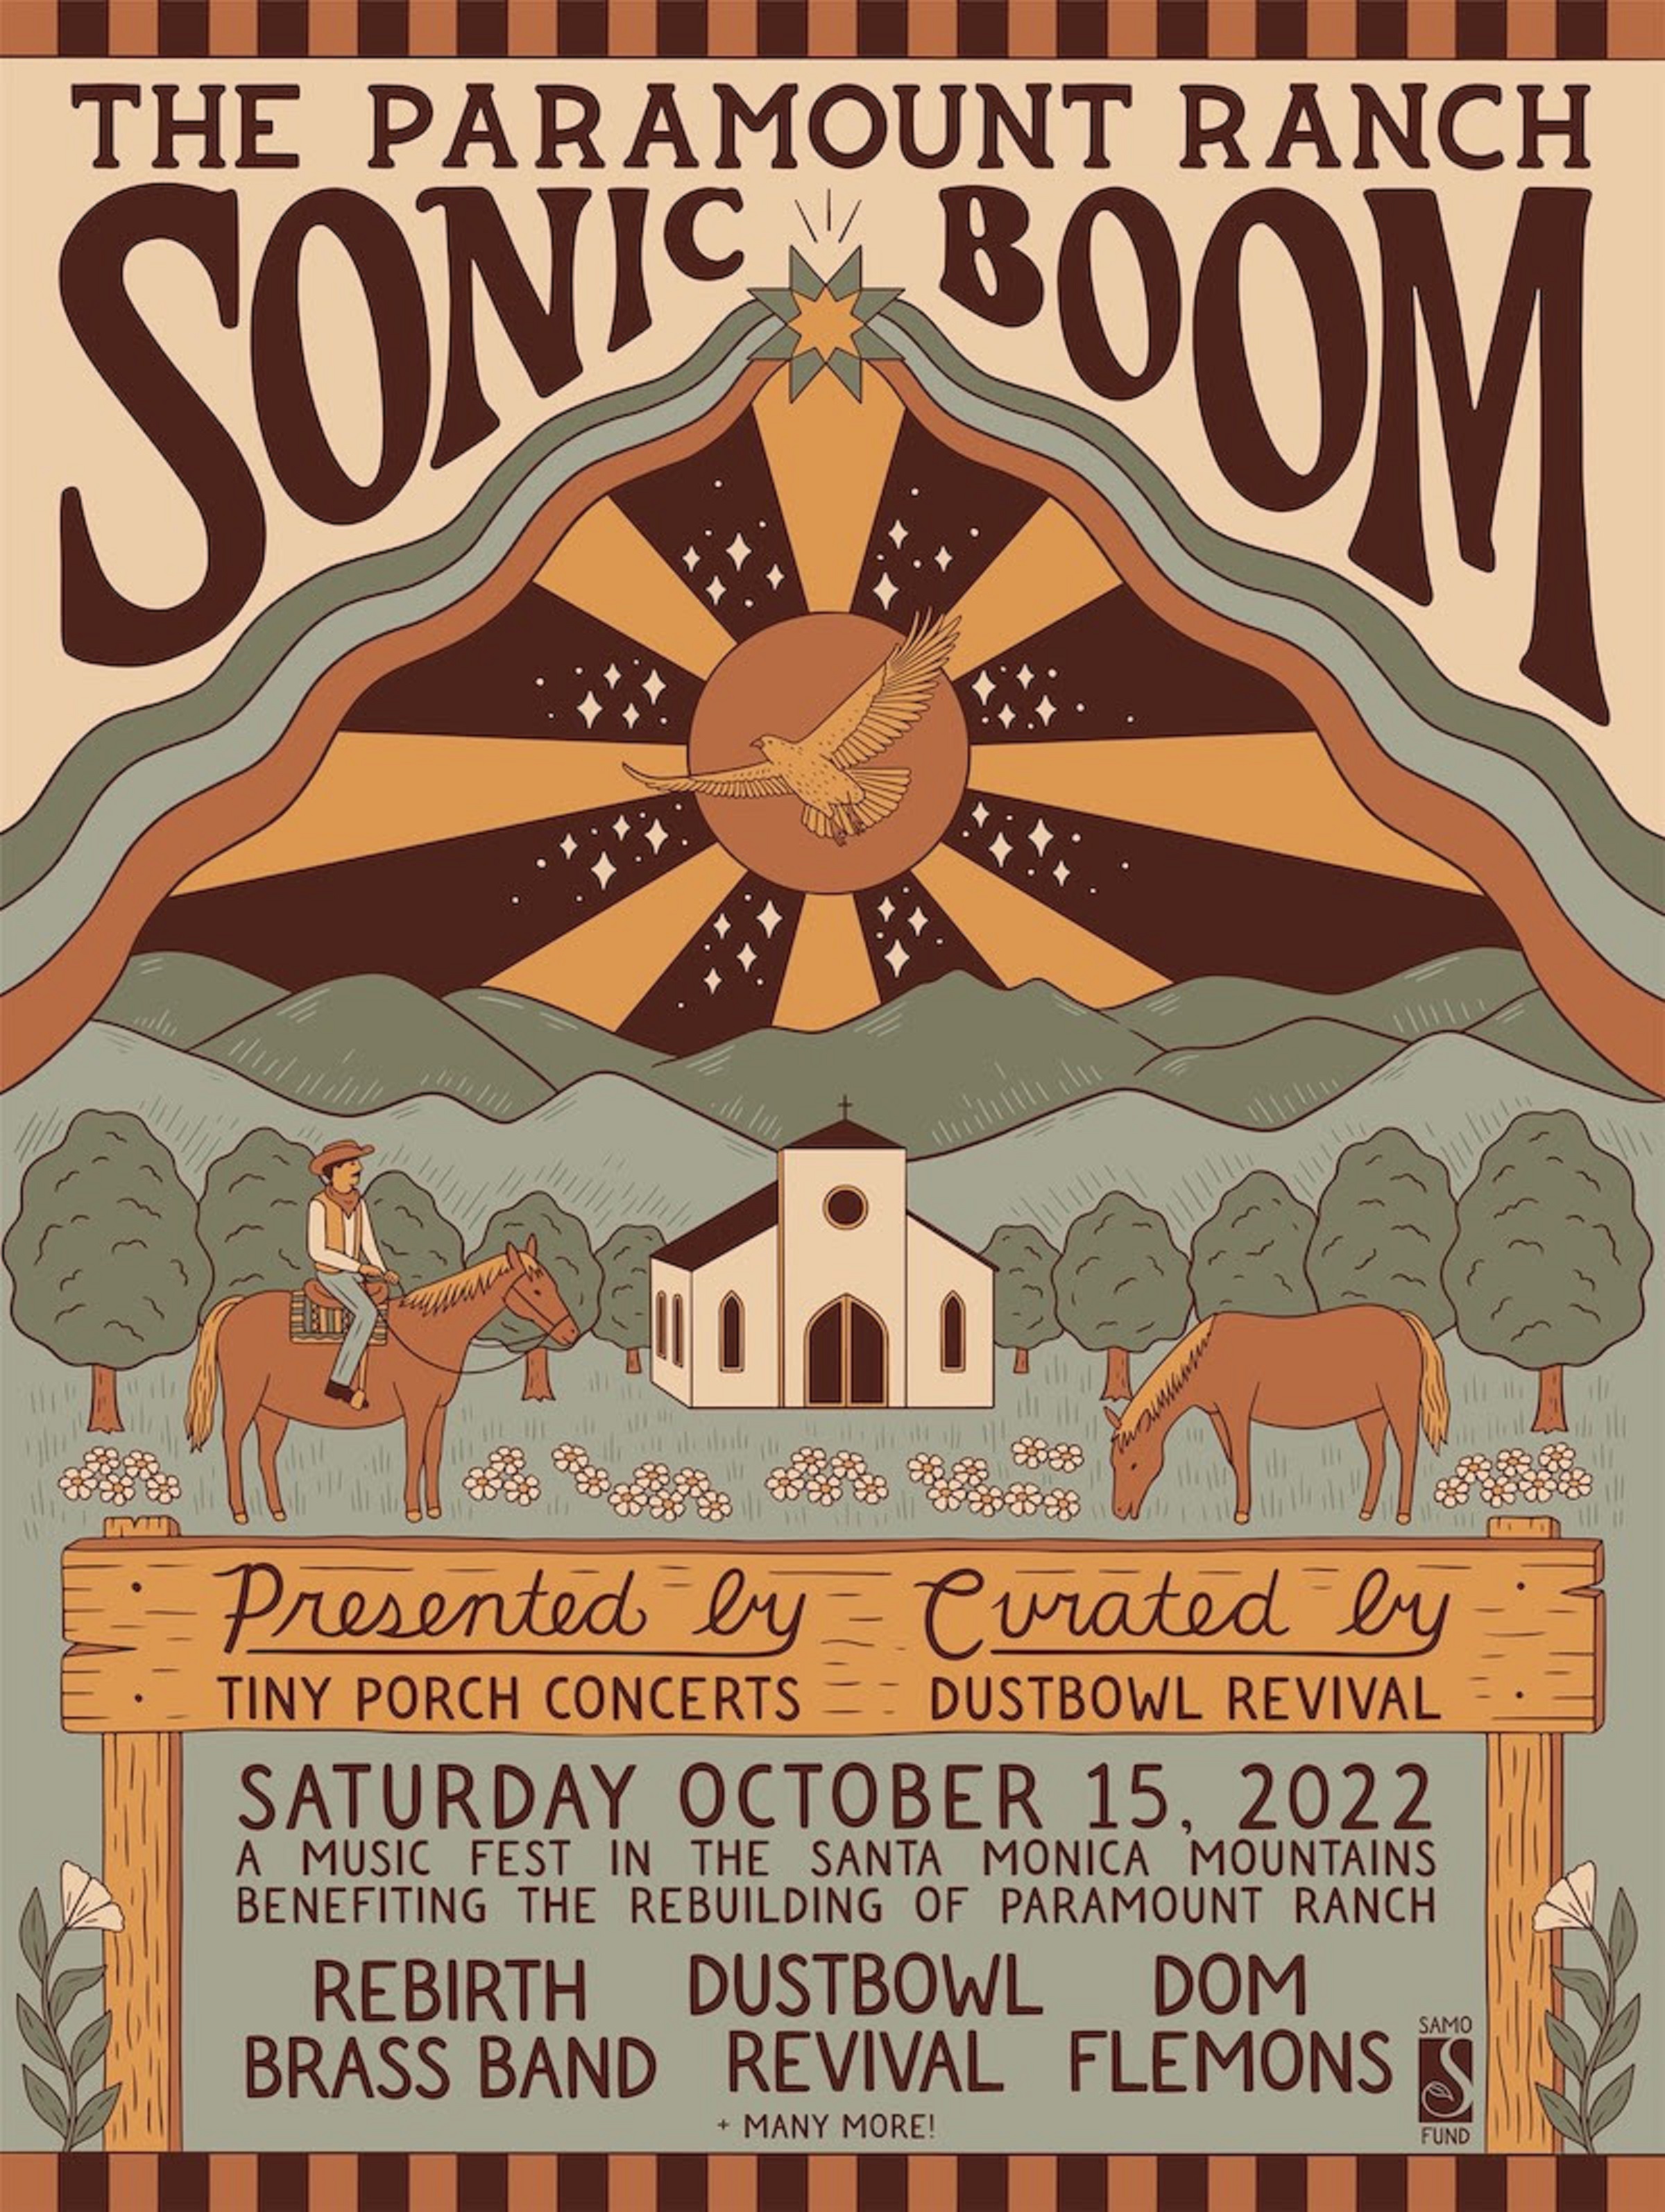 Roots-music luminaries Dustbowl Revival team with Tiny Porch Concerts for the Paramount Ranch Sonic Boom Festival ft. Rebirth Brass Band, Dom Flemons & more, proceeds to help rebuild the fire-devastated Paramount Ranch